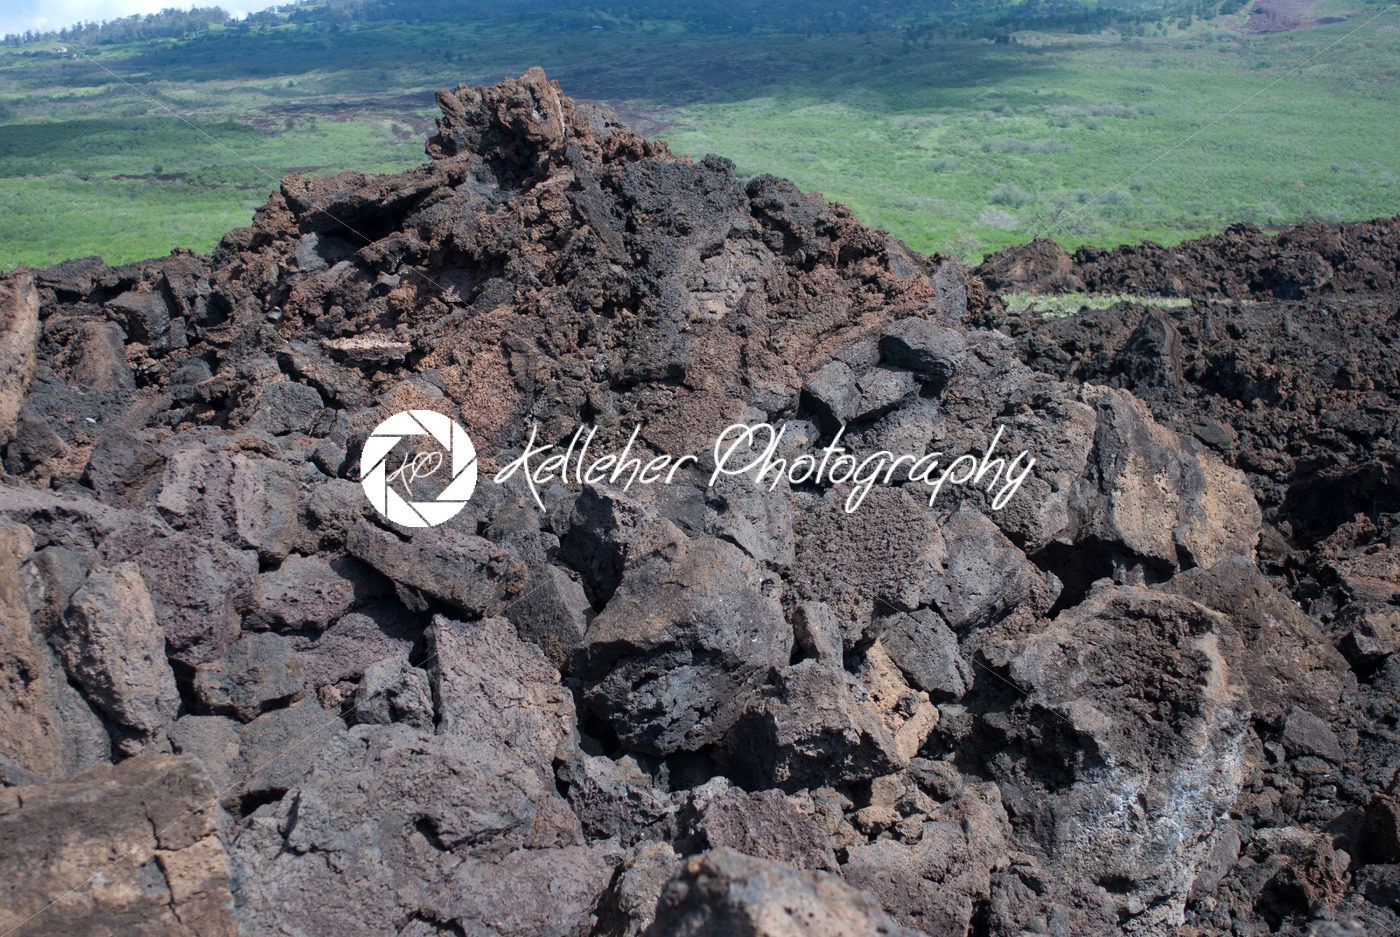 Black lava rocks line the shore at Keanae on the road to Hana in Maui, Hawaii - Kelleher Photography Store